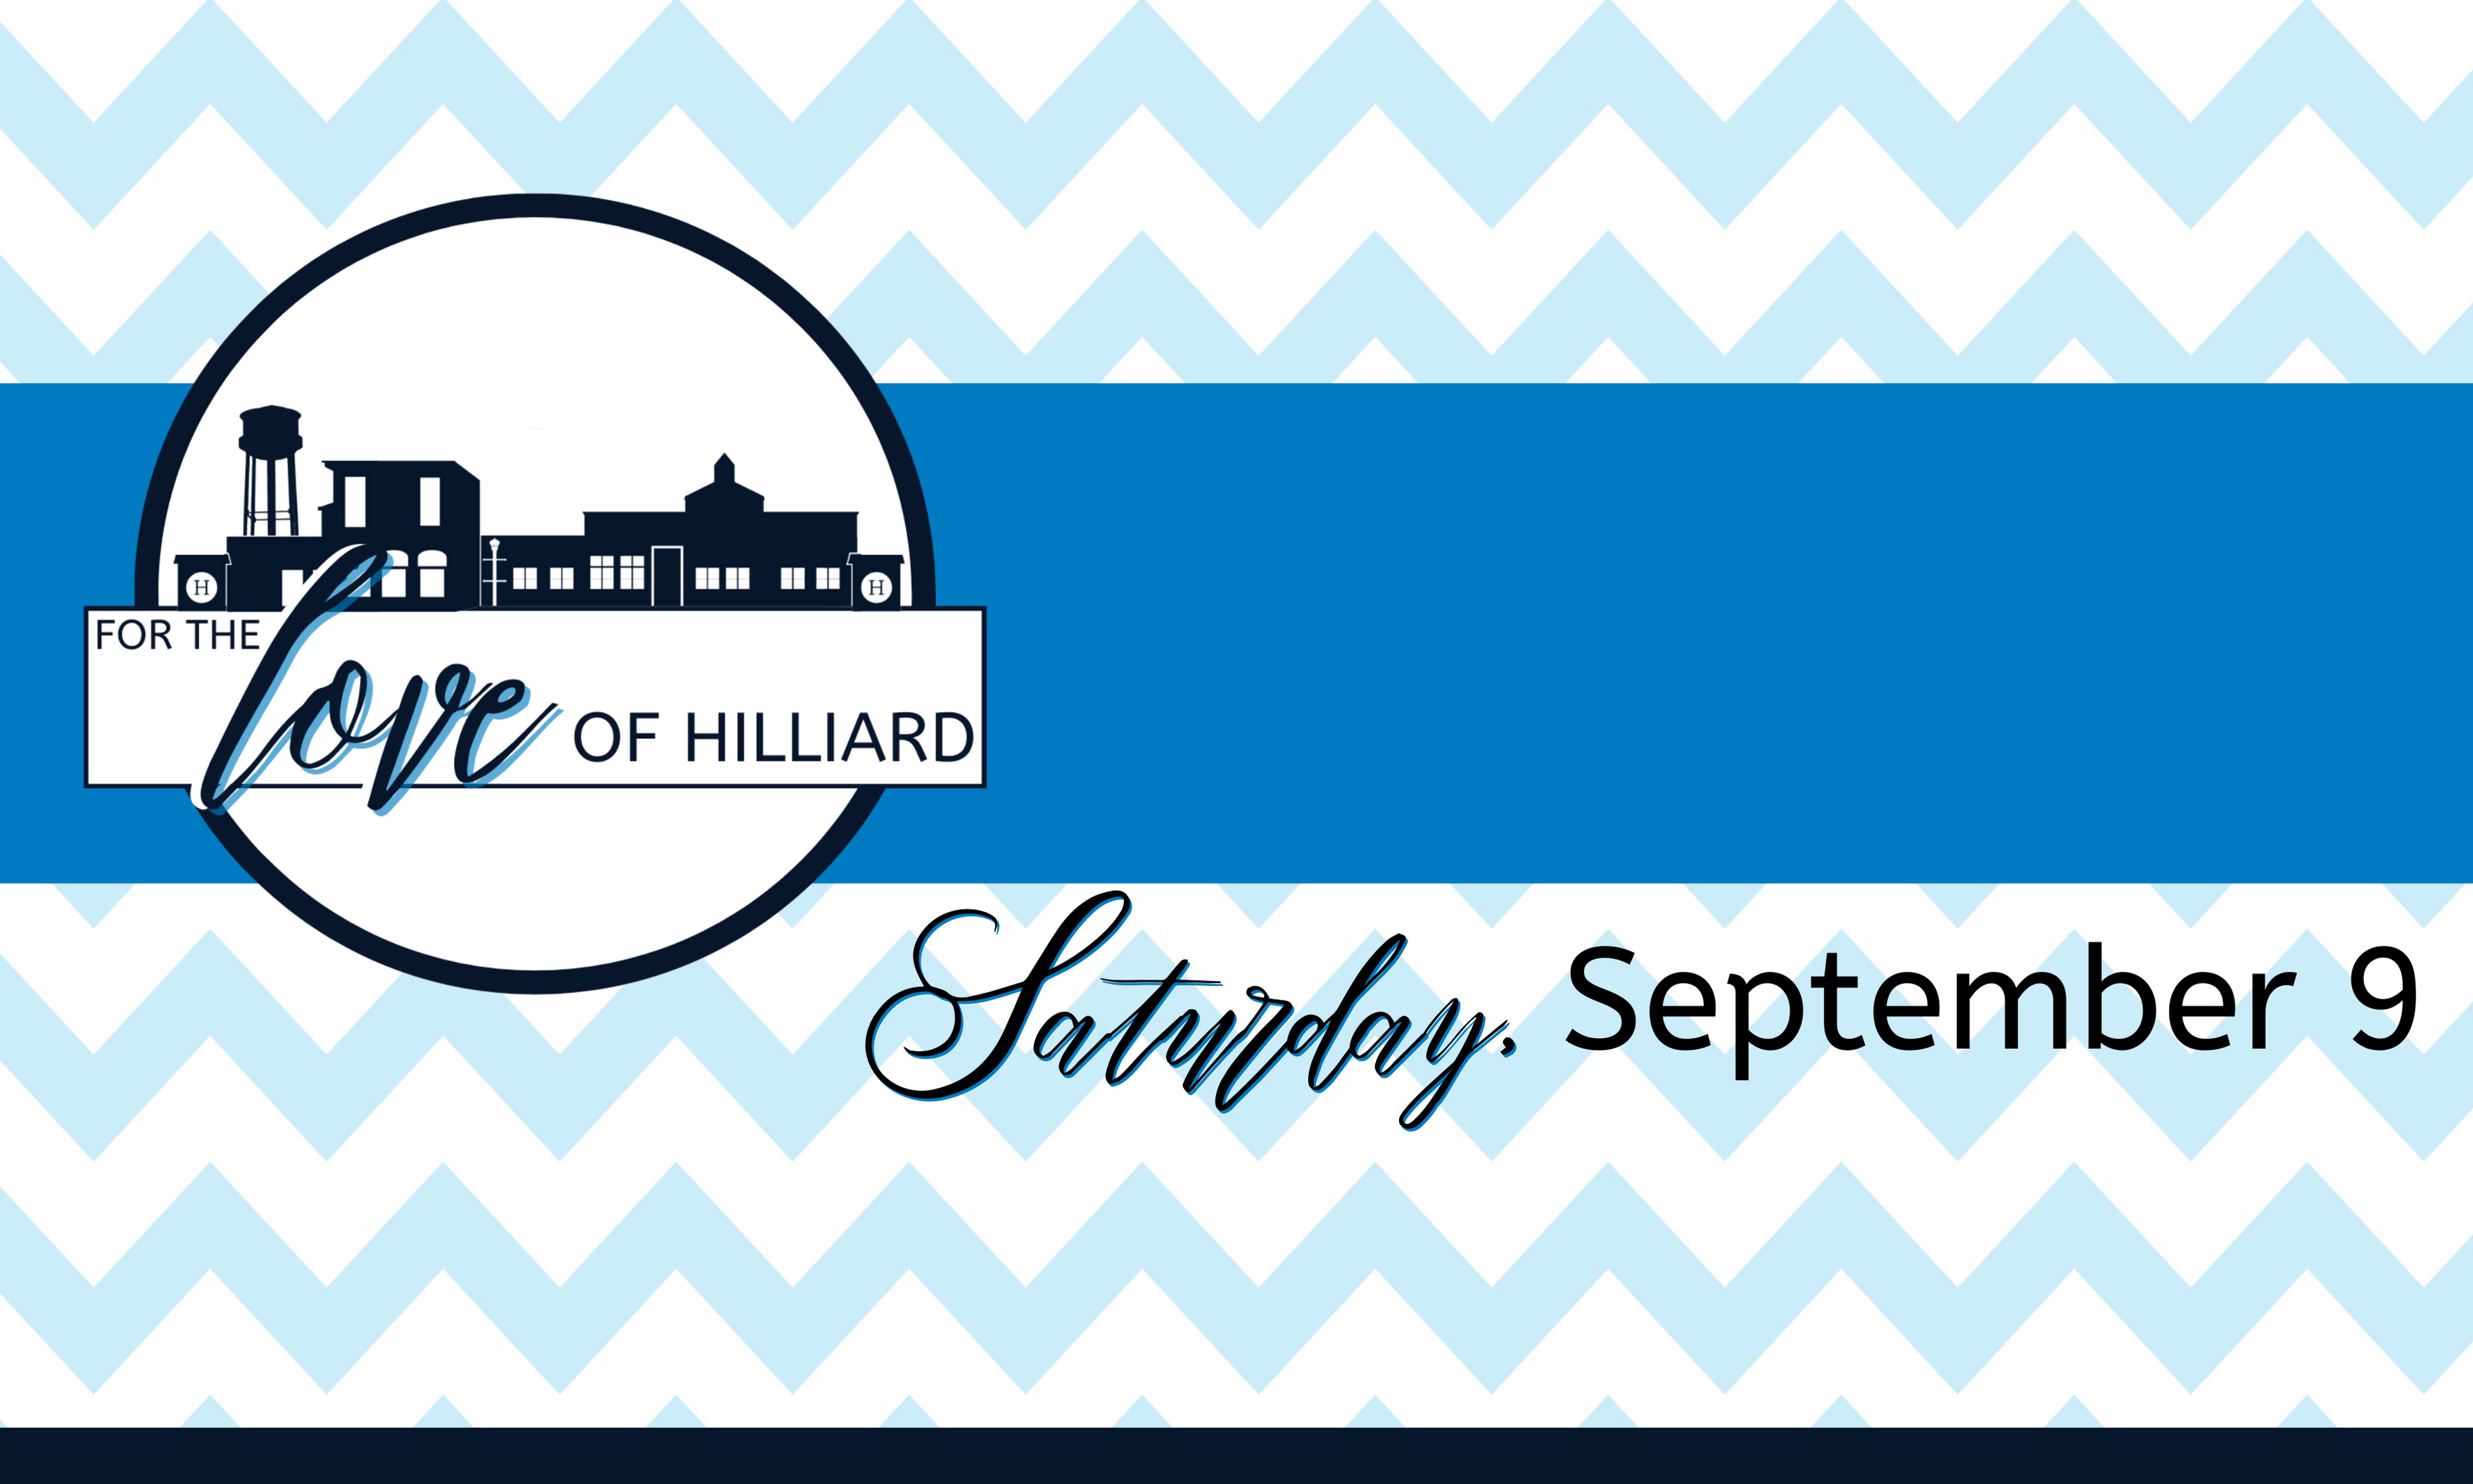 For the Love of Hilliard Graphic